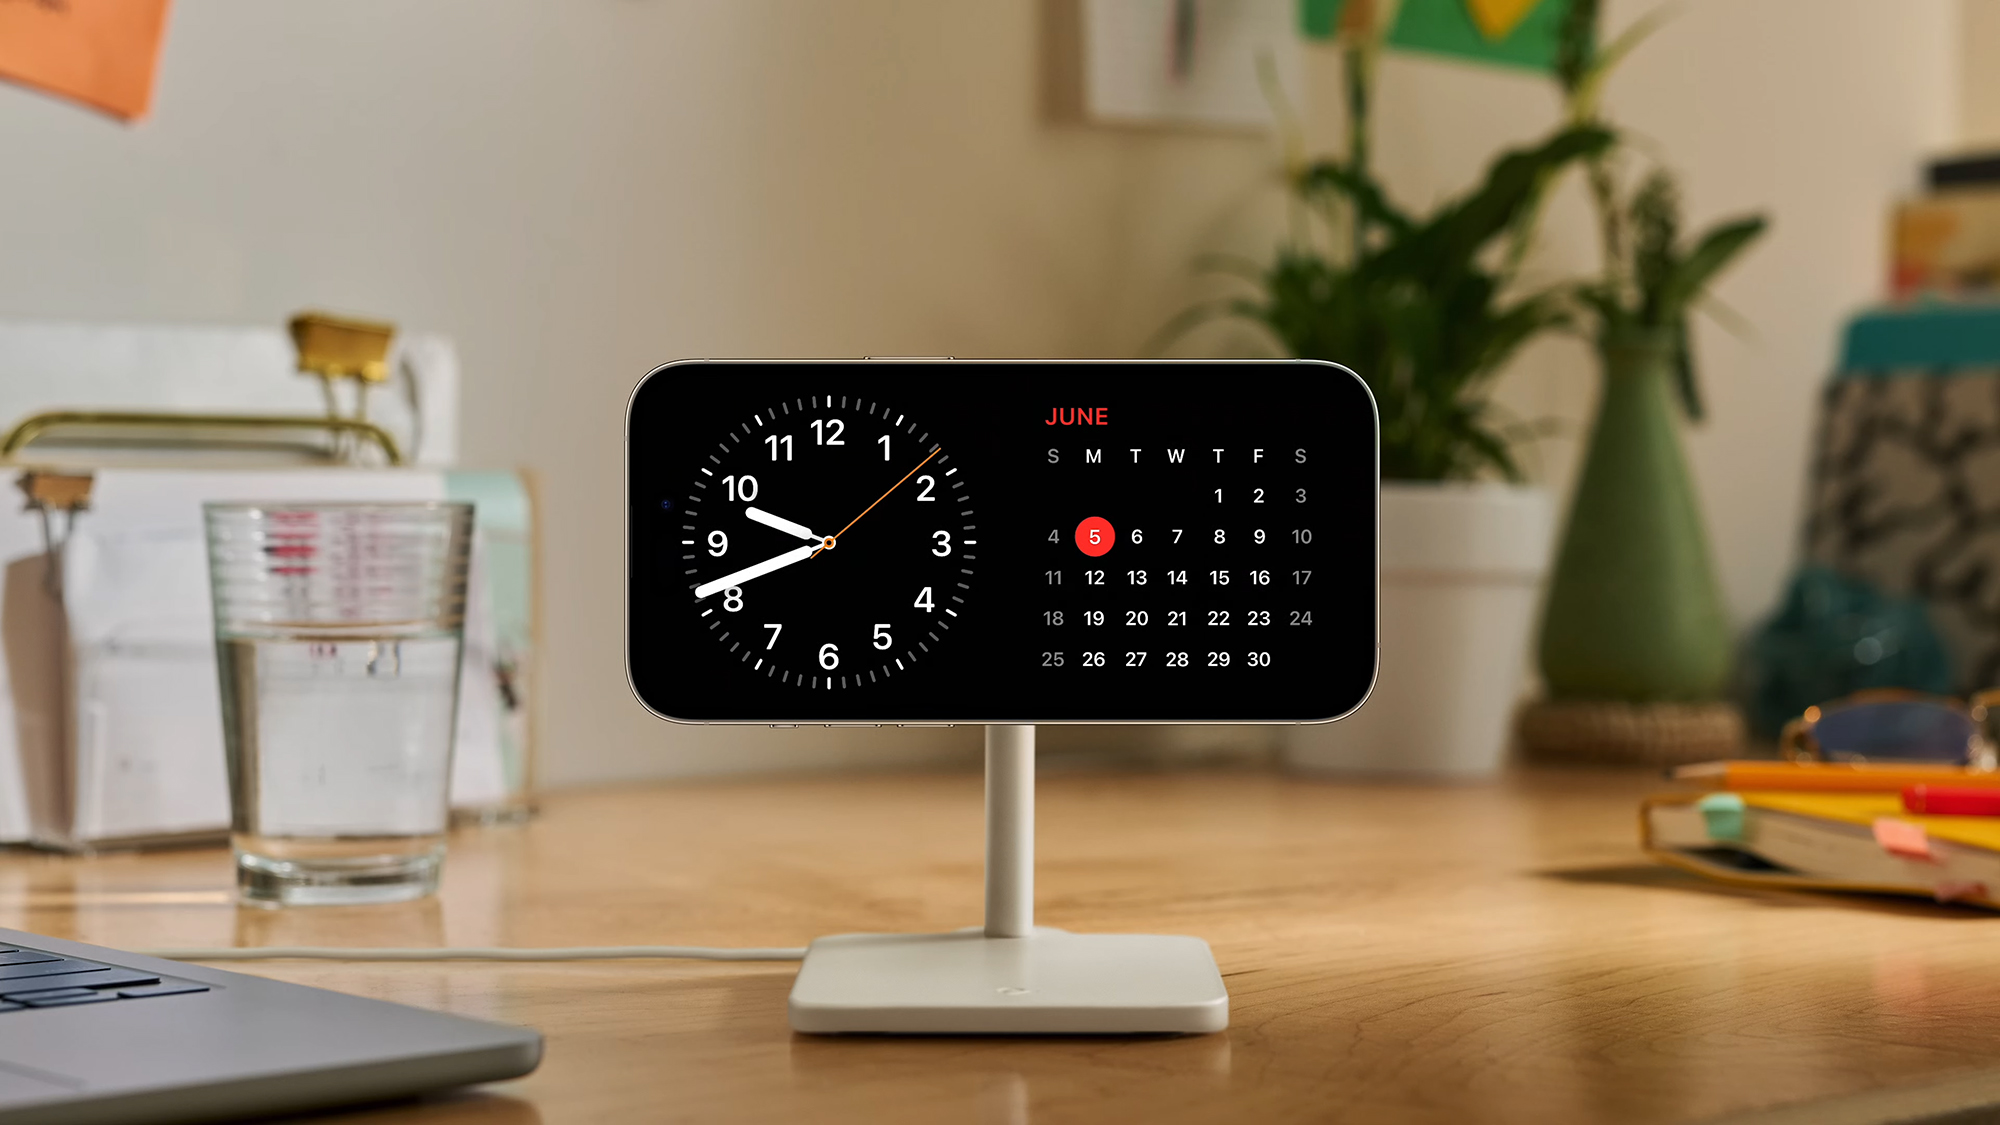 Turn your iPhone into a bedside clock with StandBy mode